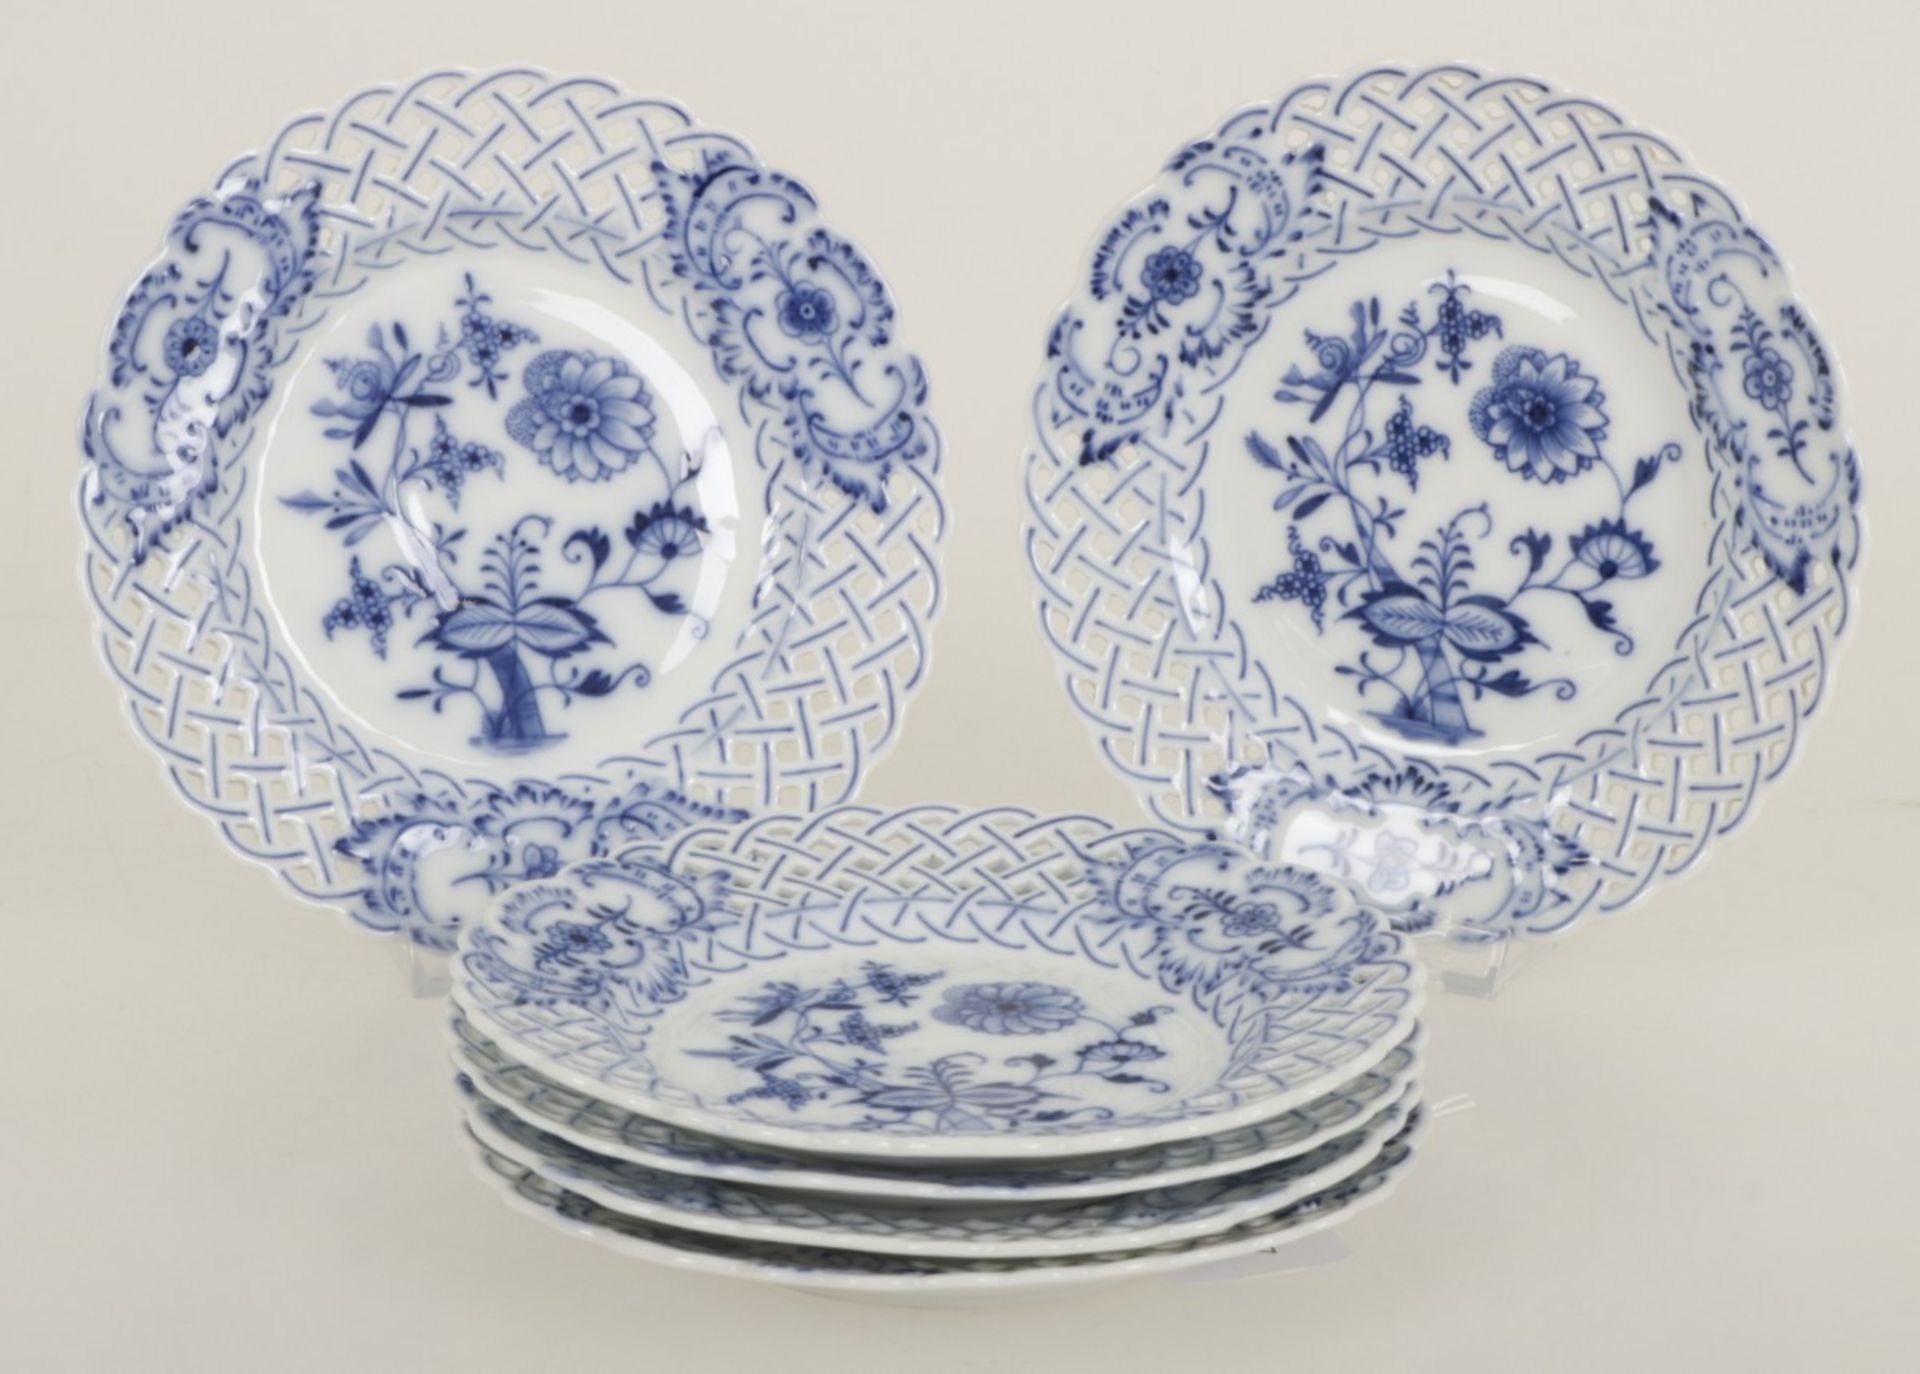 A set of (6) porcelain plates with Zwiebelmuster decor, Meissen, mid 20th century. Meissen, mid 20th